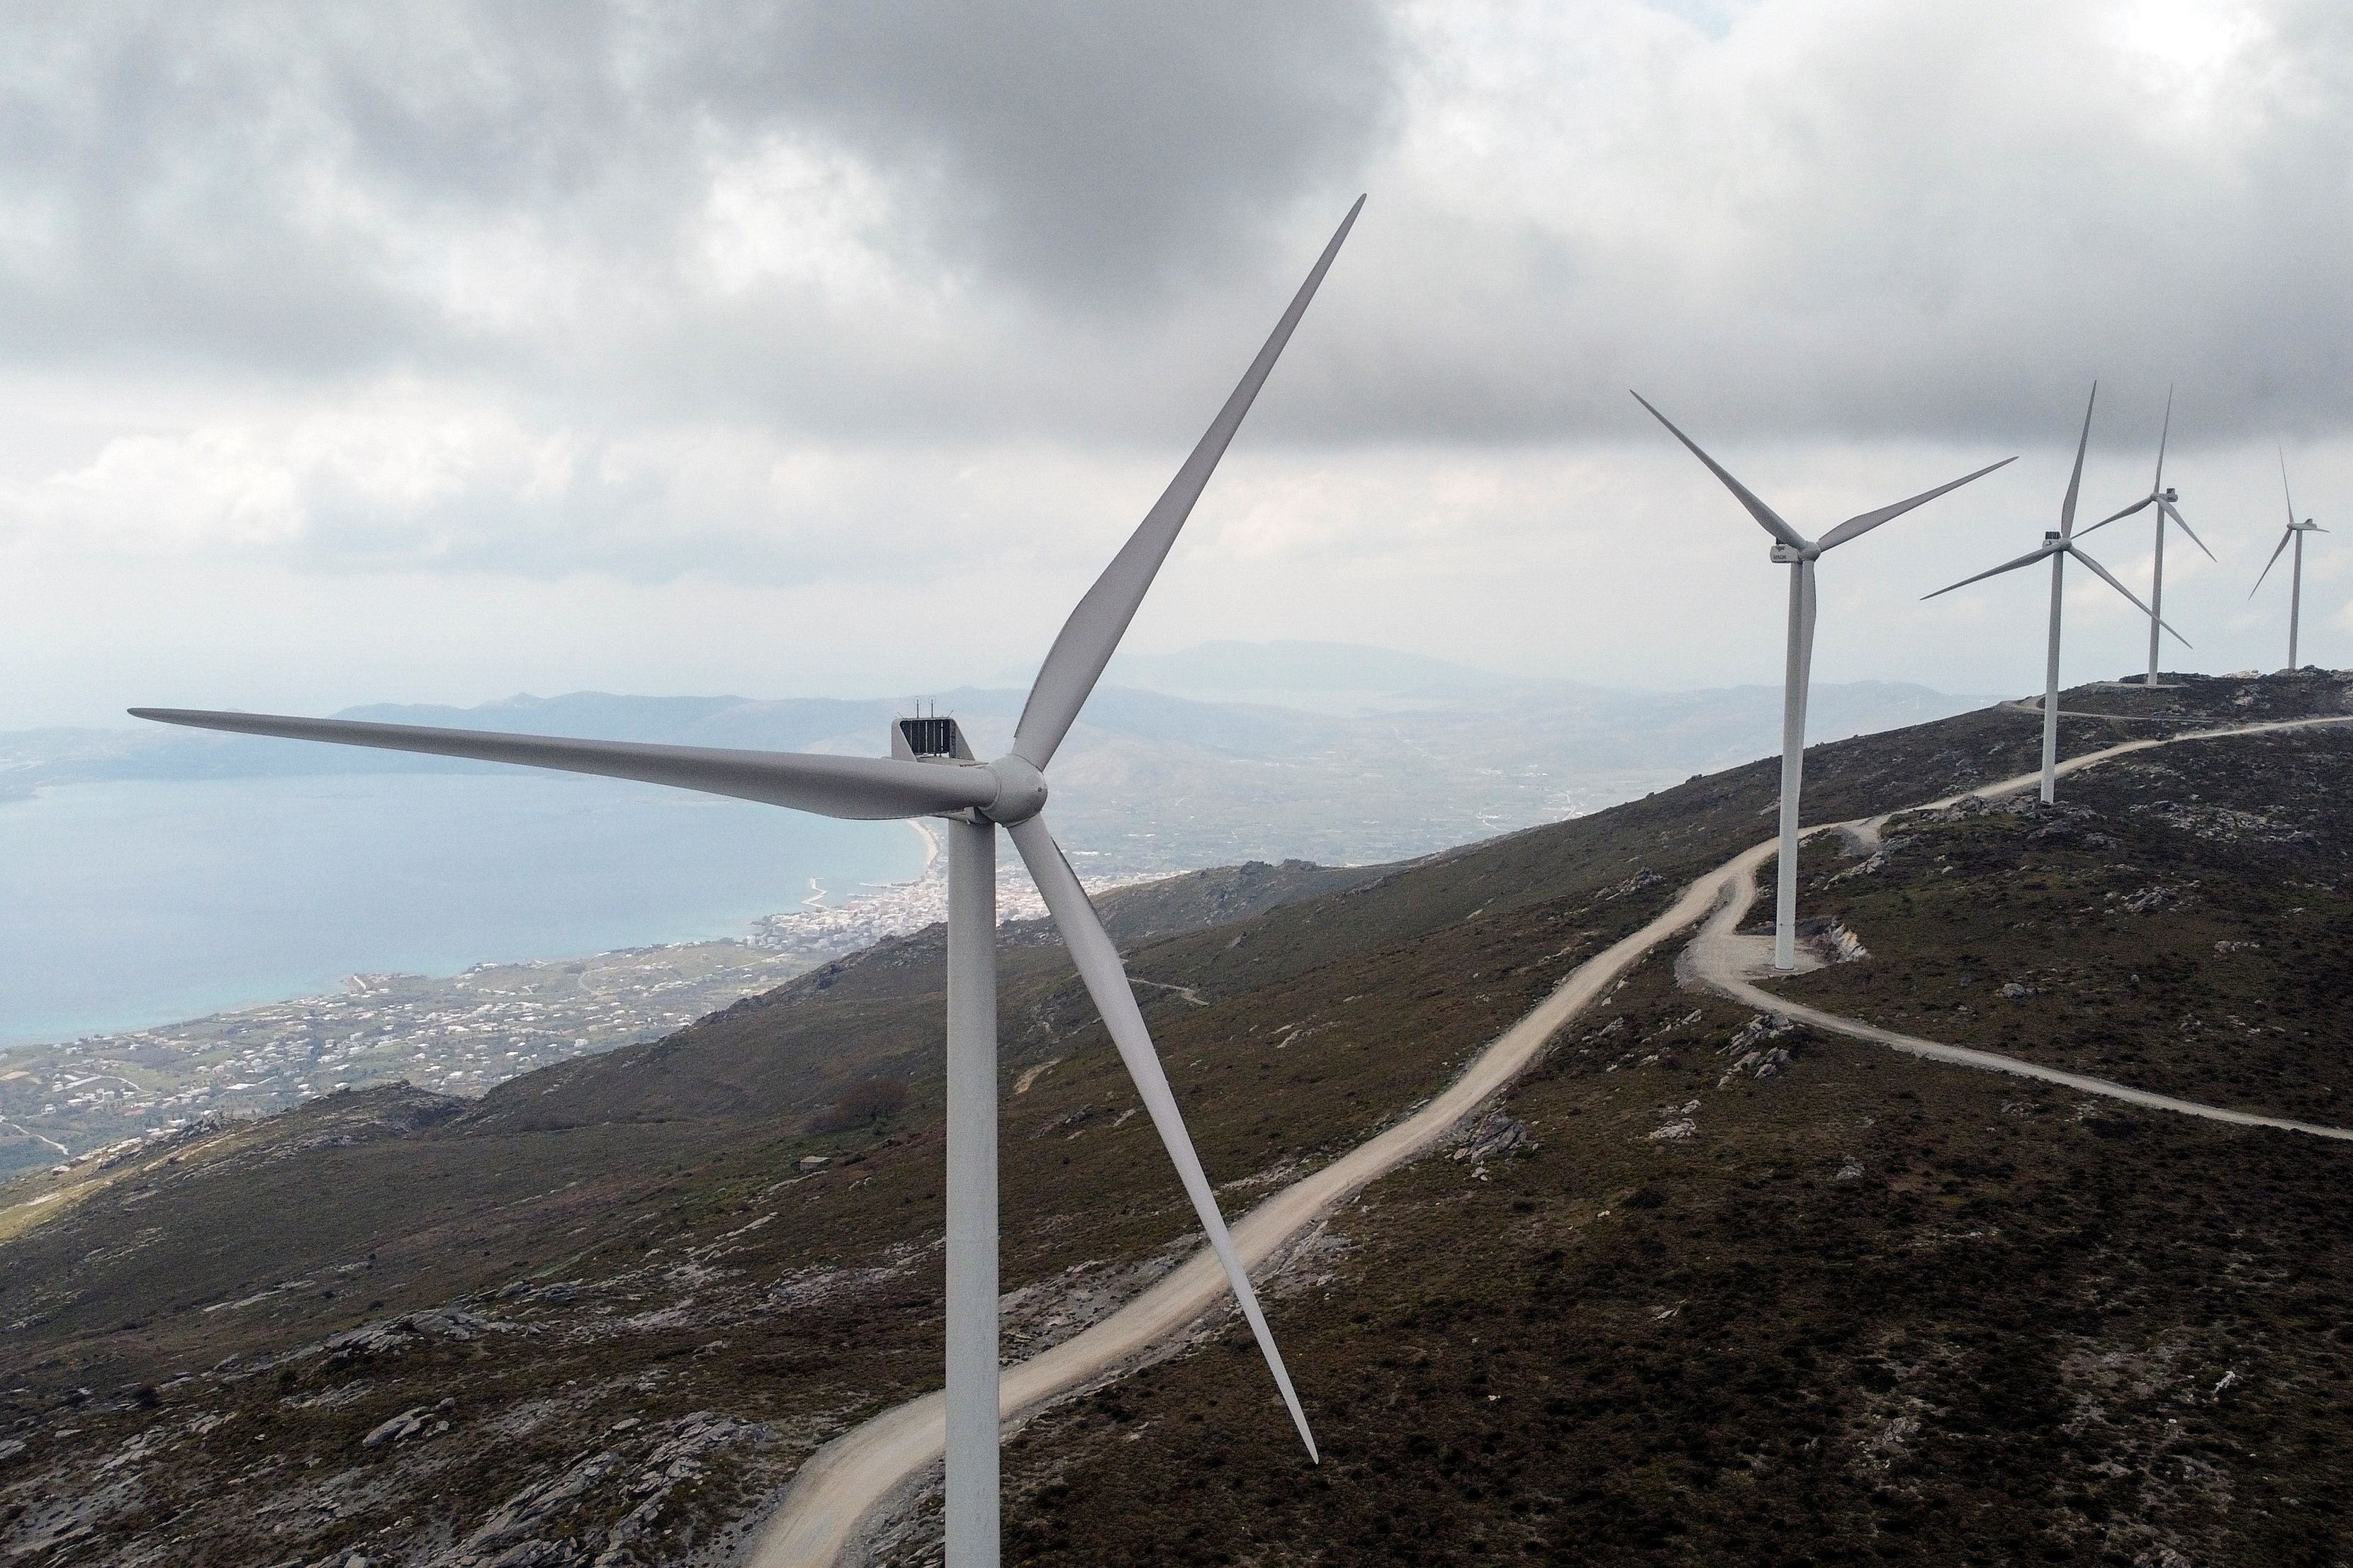 Wind turbines are seen on a mountain near the town of Karystos, on the island of Evia, Greece